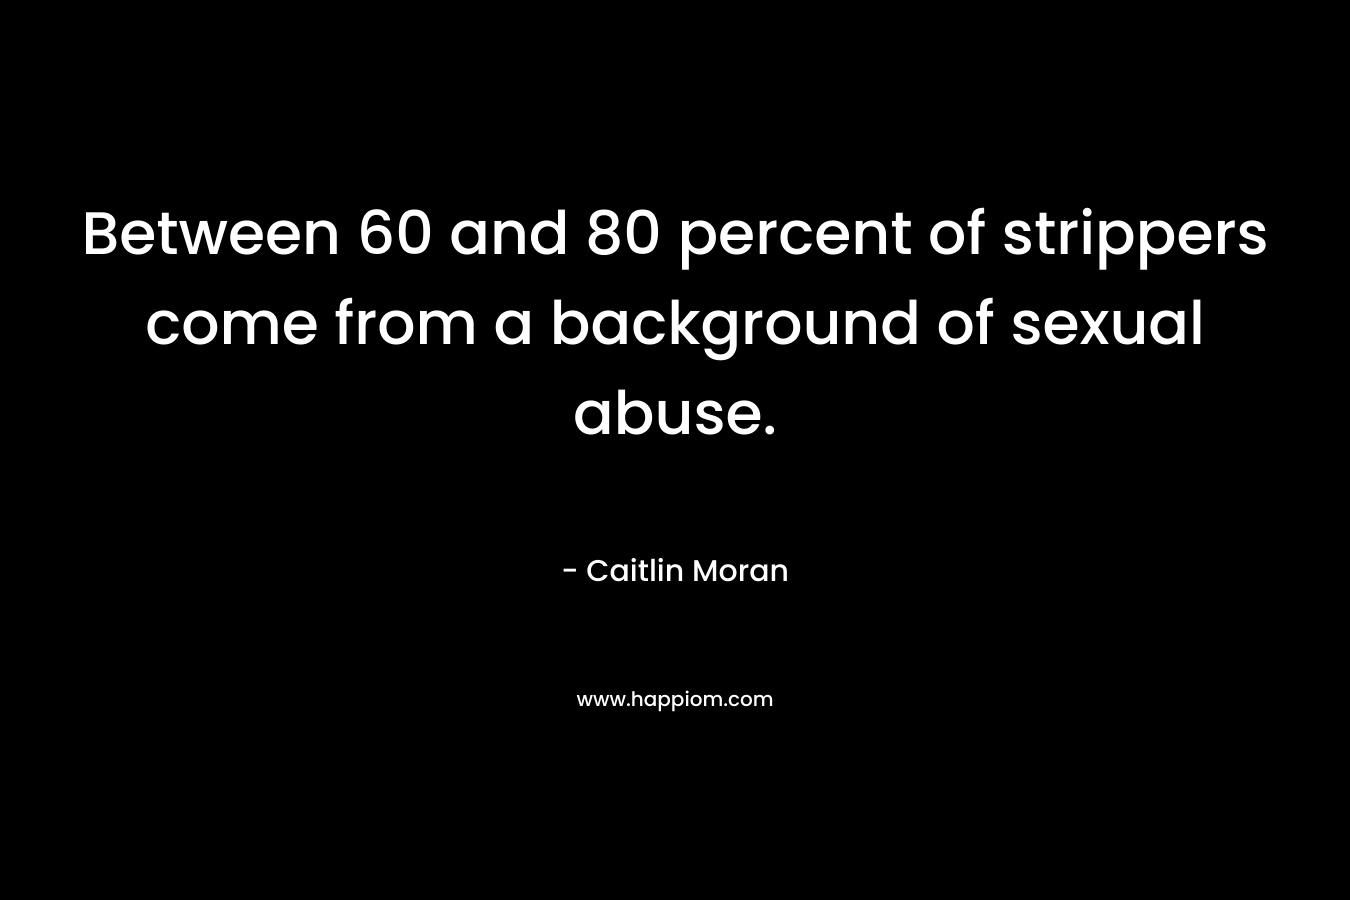 Between 60 and 80 percent of strippers come from a background of sexual abuse.